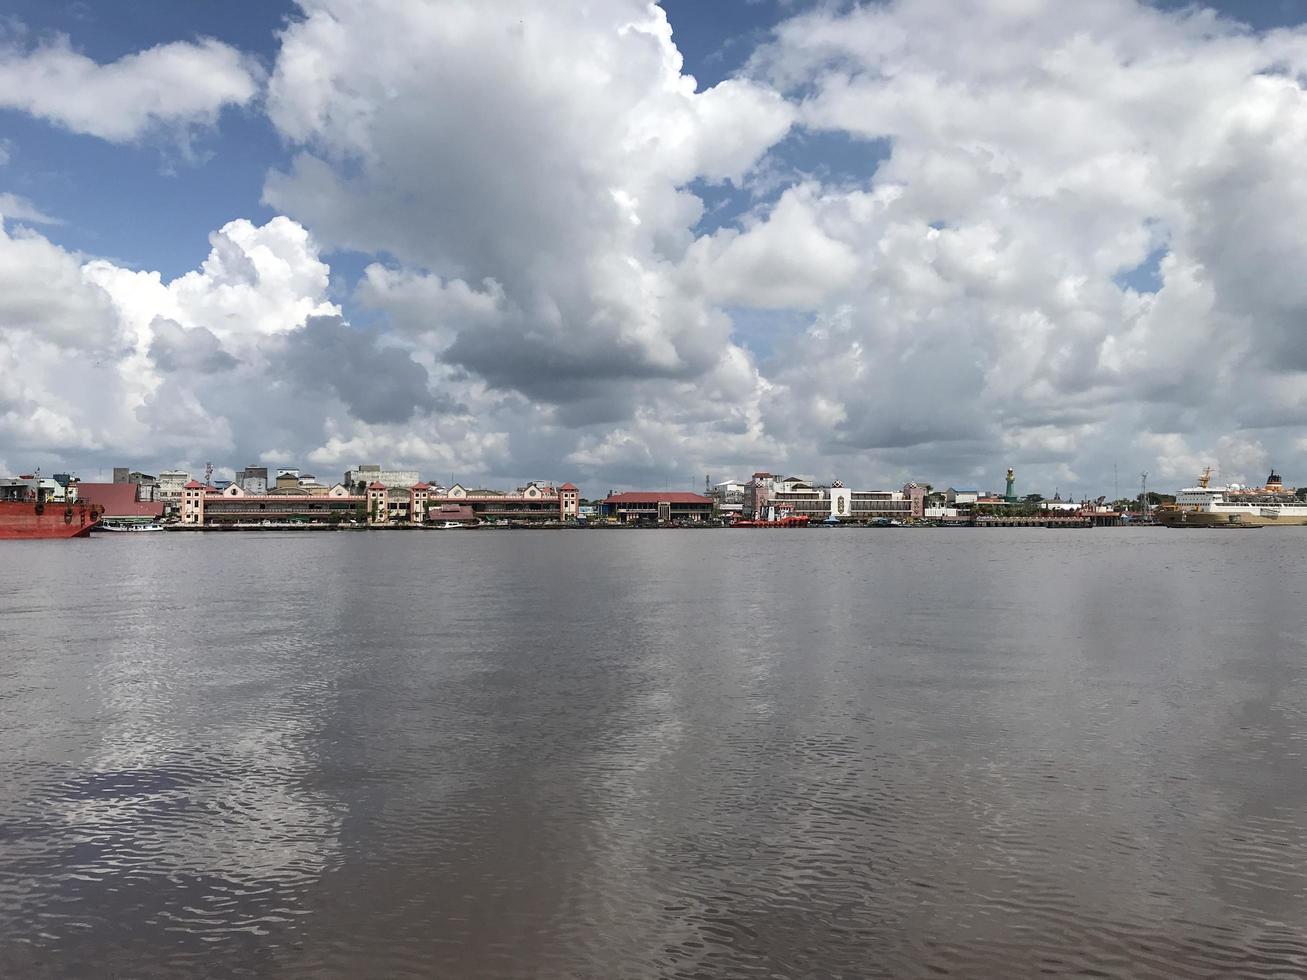 The wide river where the boats pass with views of white clouds and blue skies and in the middle there are traditional market buildings lined up photo